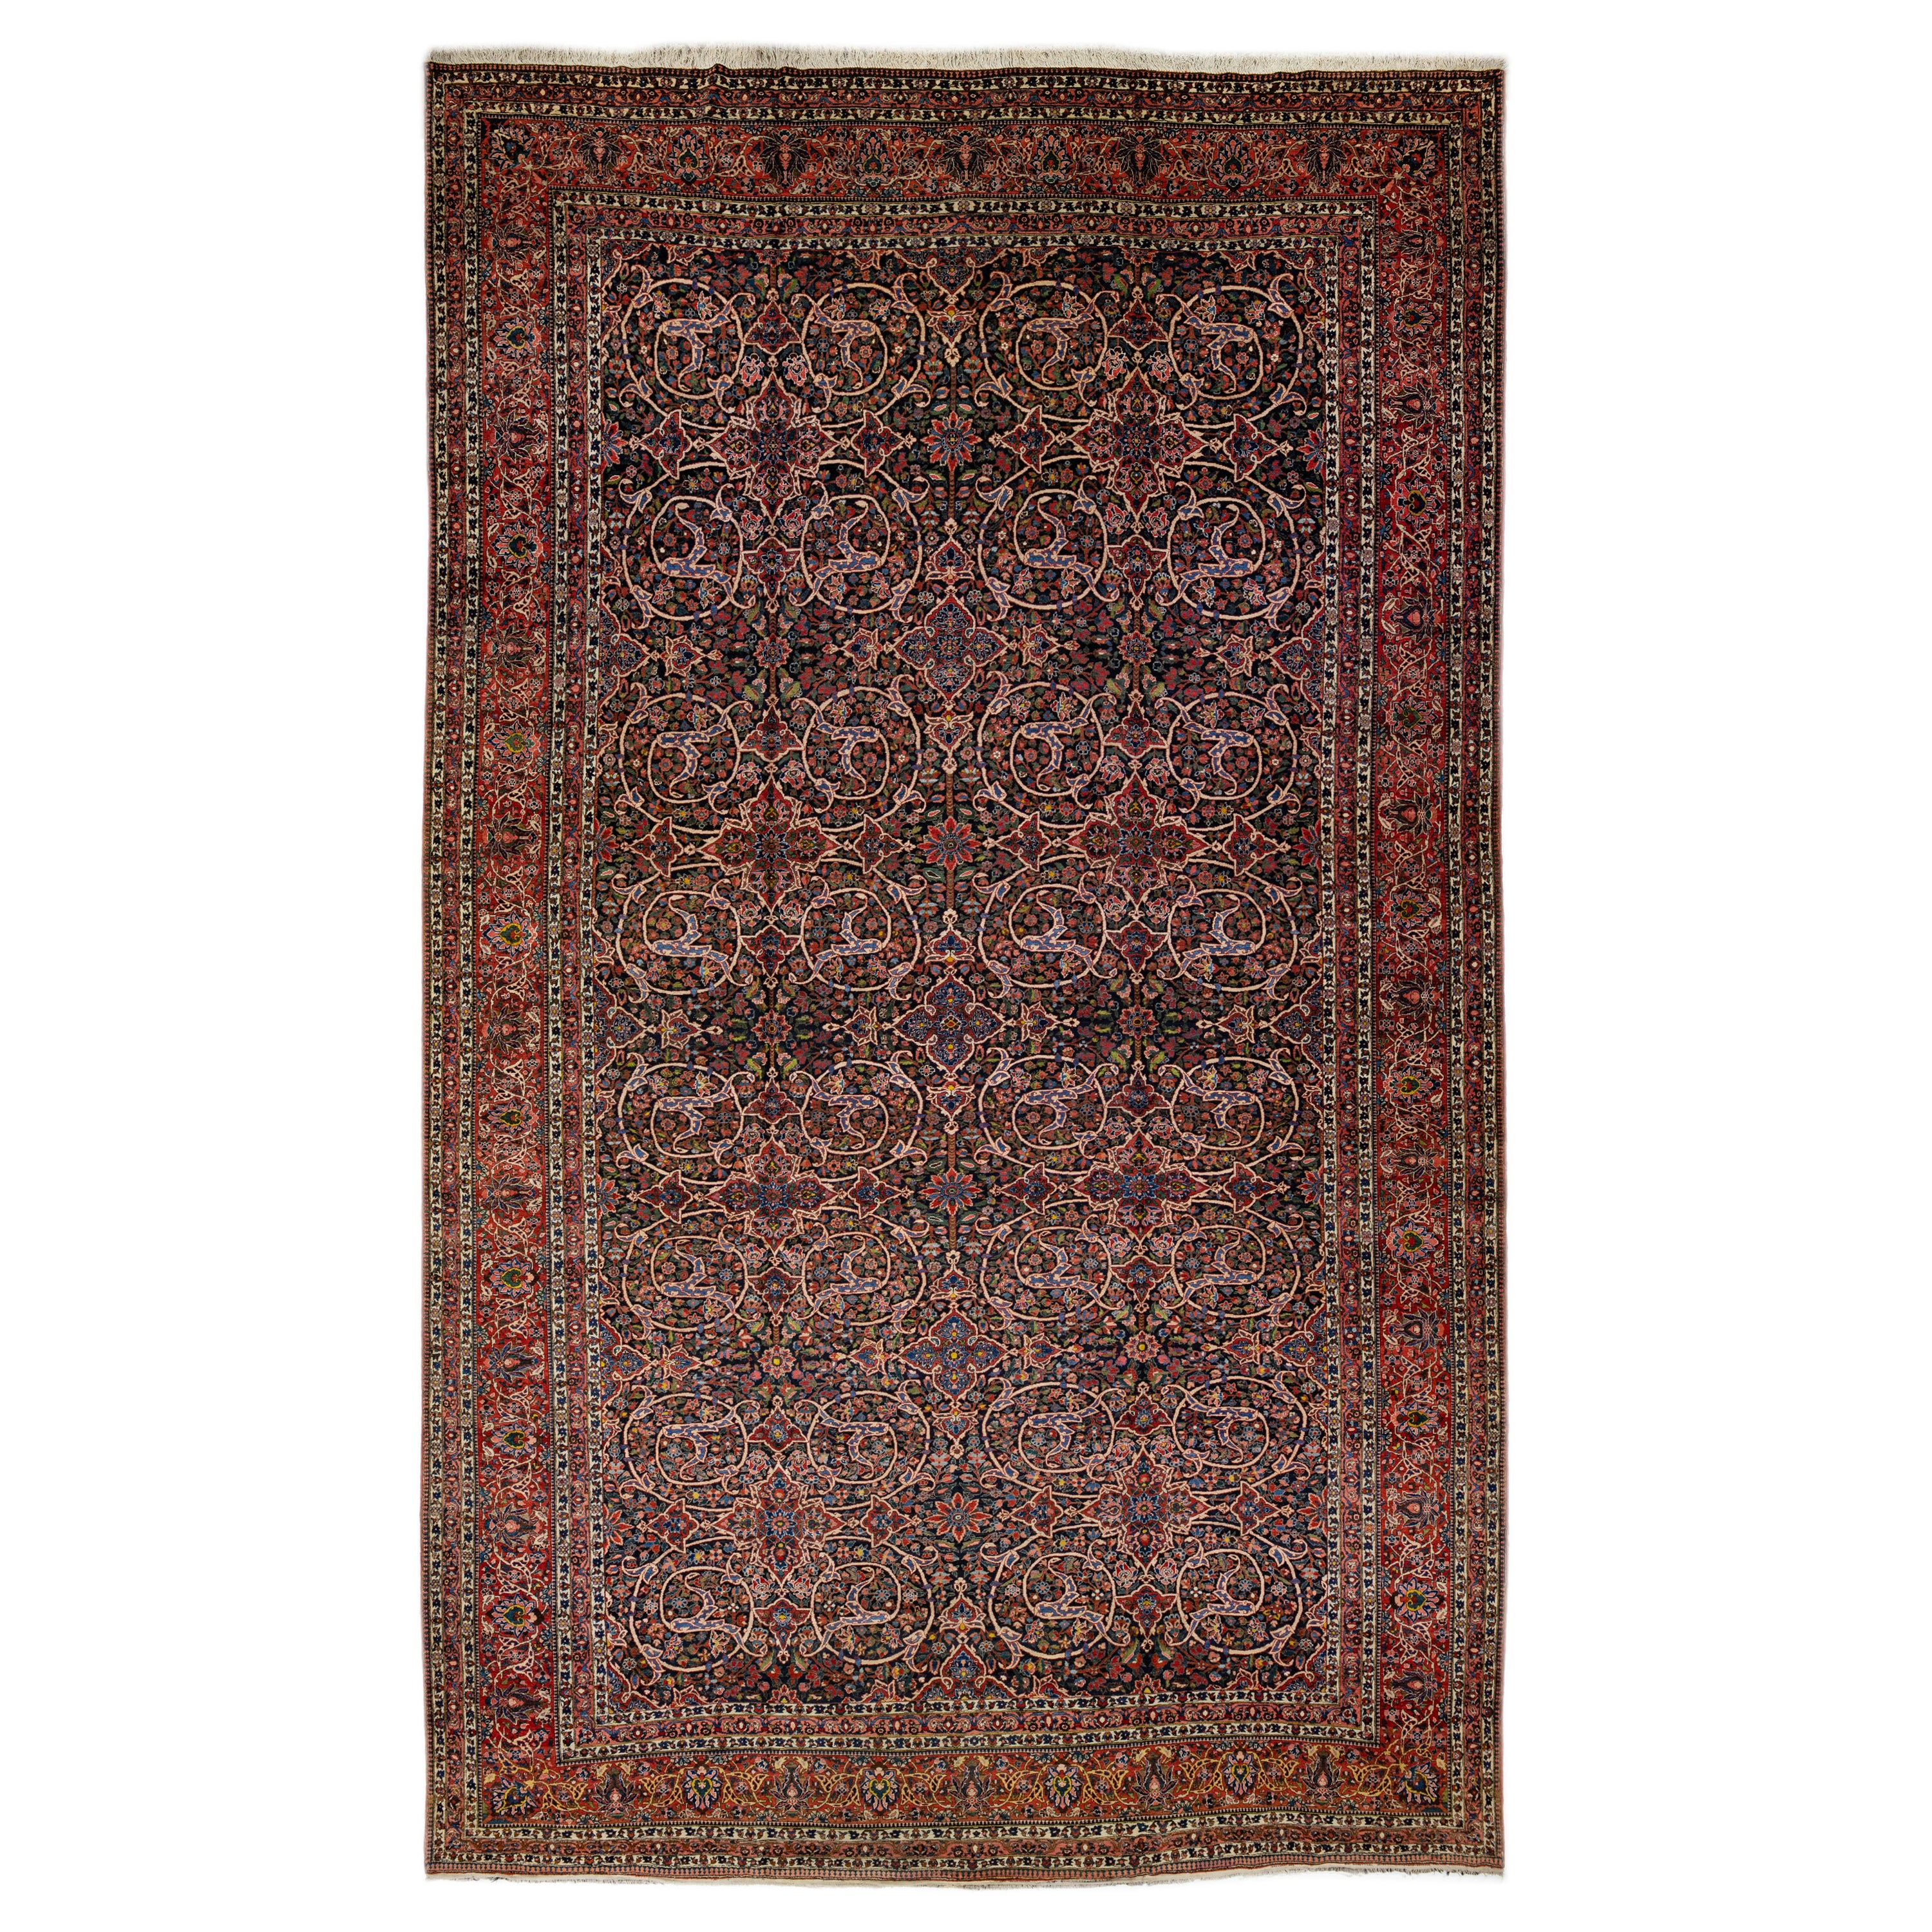 Antique Bakhtiari Persian Handmade Red & Blue Wool Rug With Floral Pattern